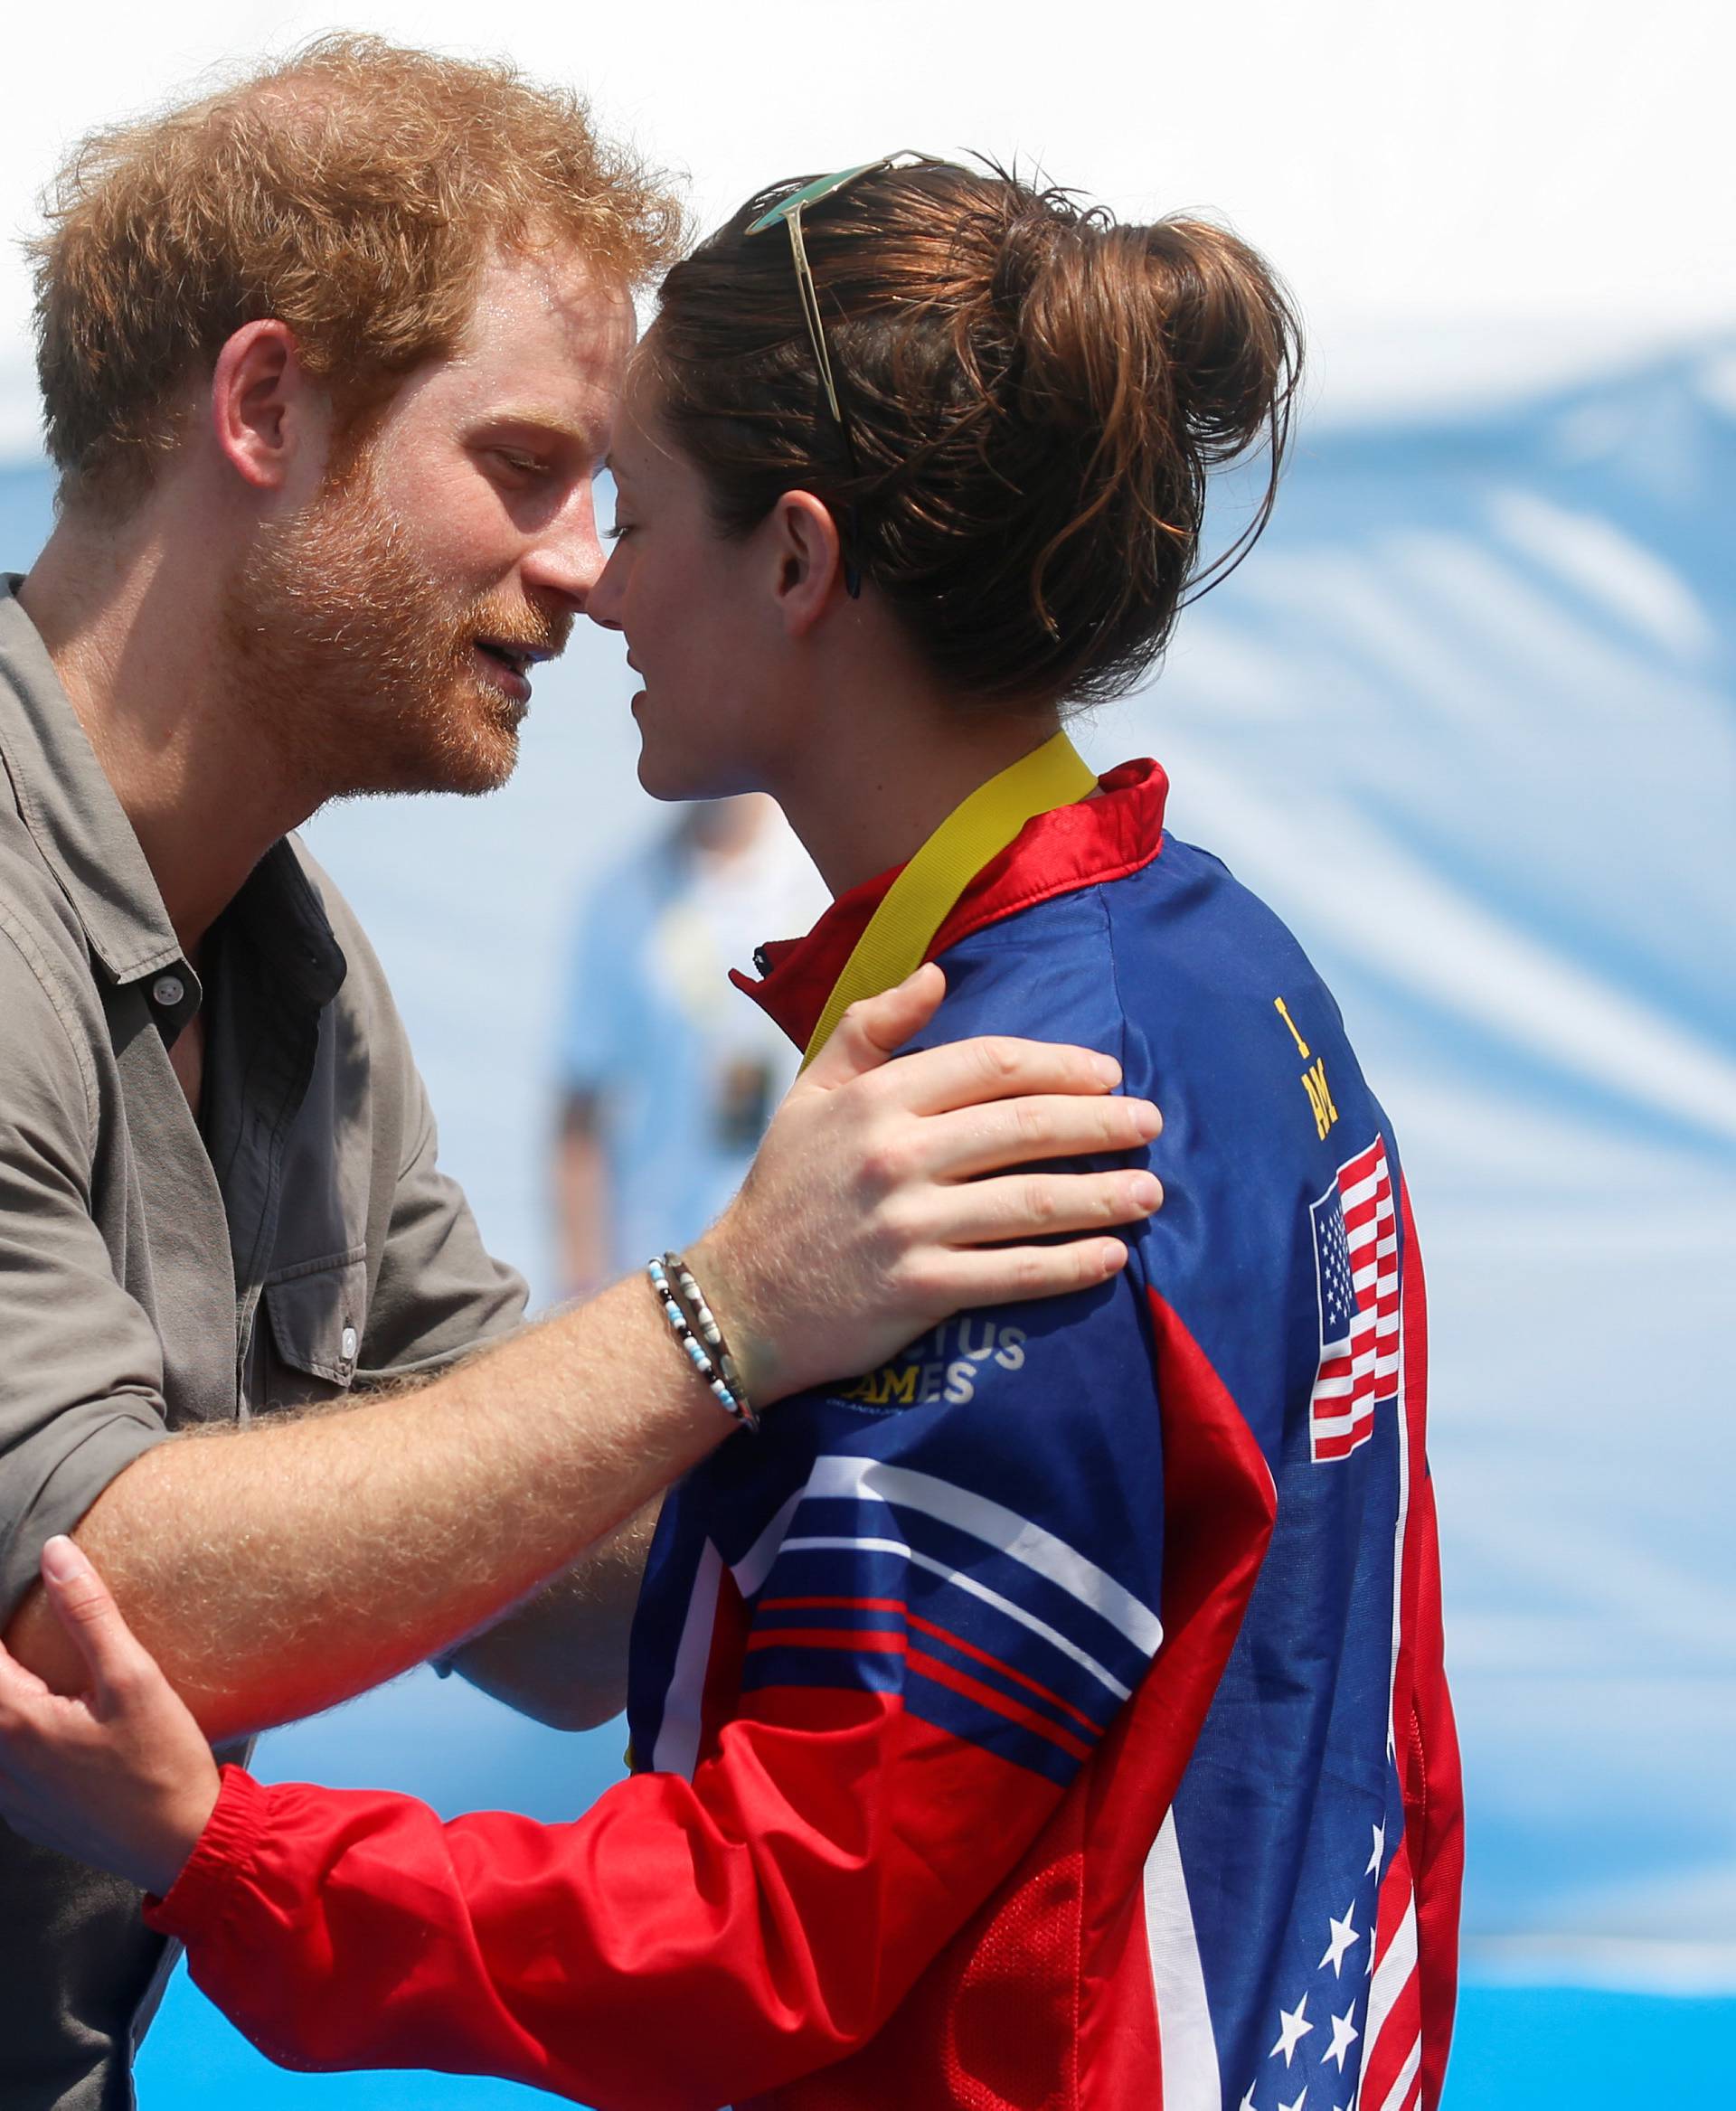 Britain's Prince Harry greets Elizabeth Marks of the U.S. after presenting her with a gold medal during a medal ceremony at the Invictus Games in Orlando